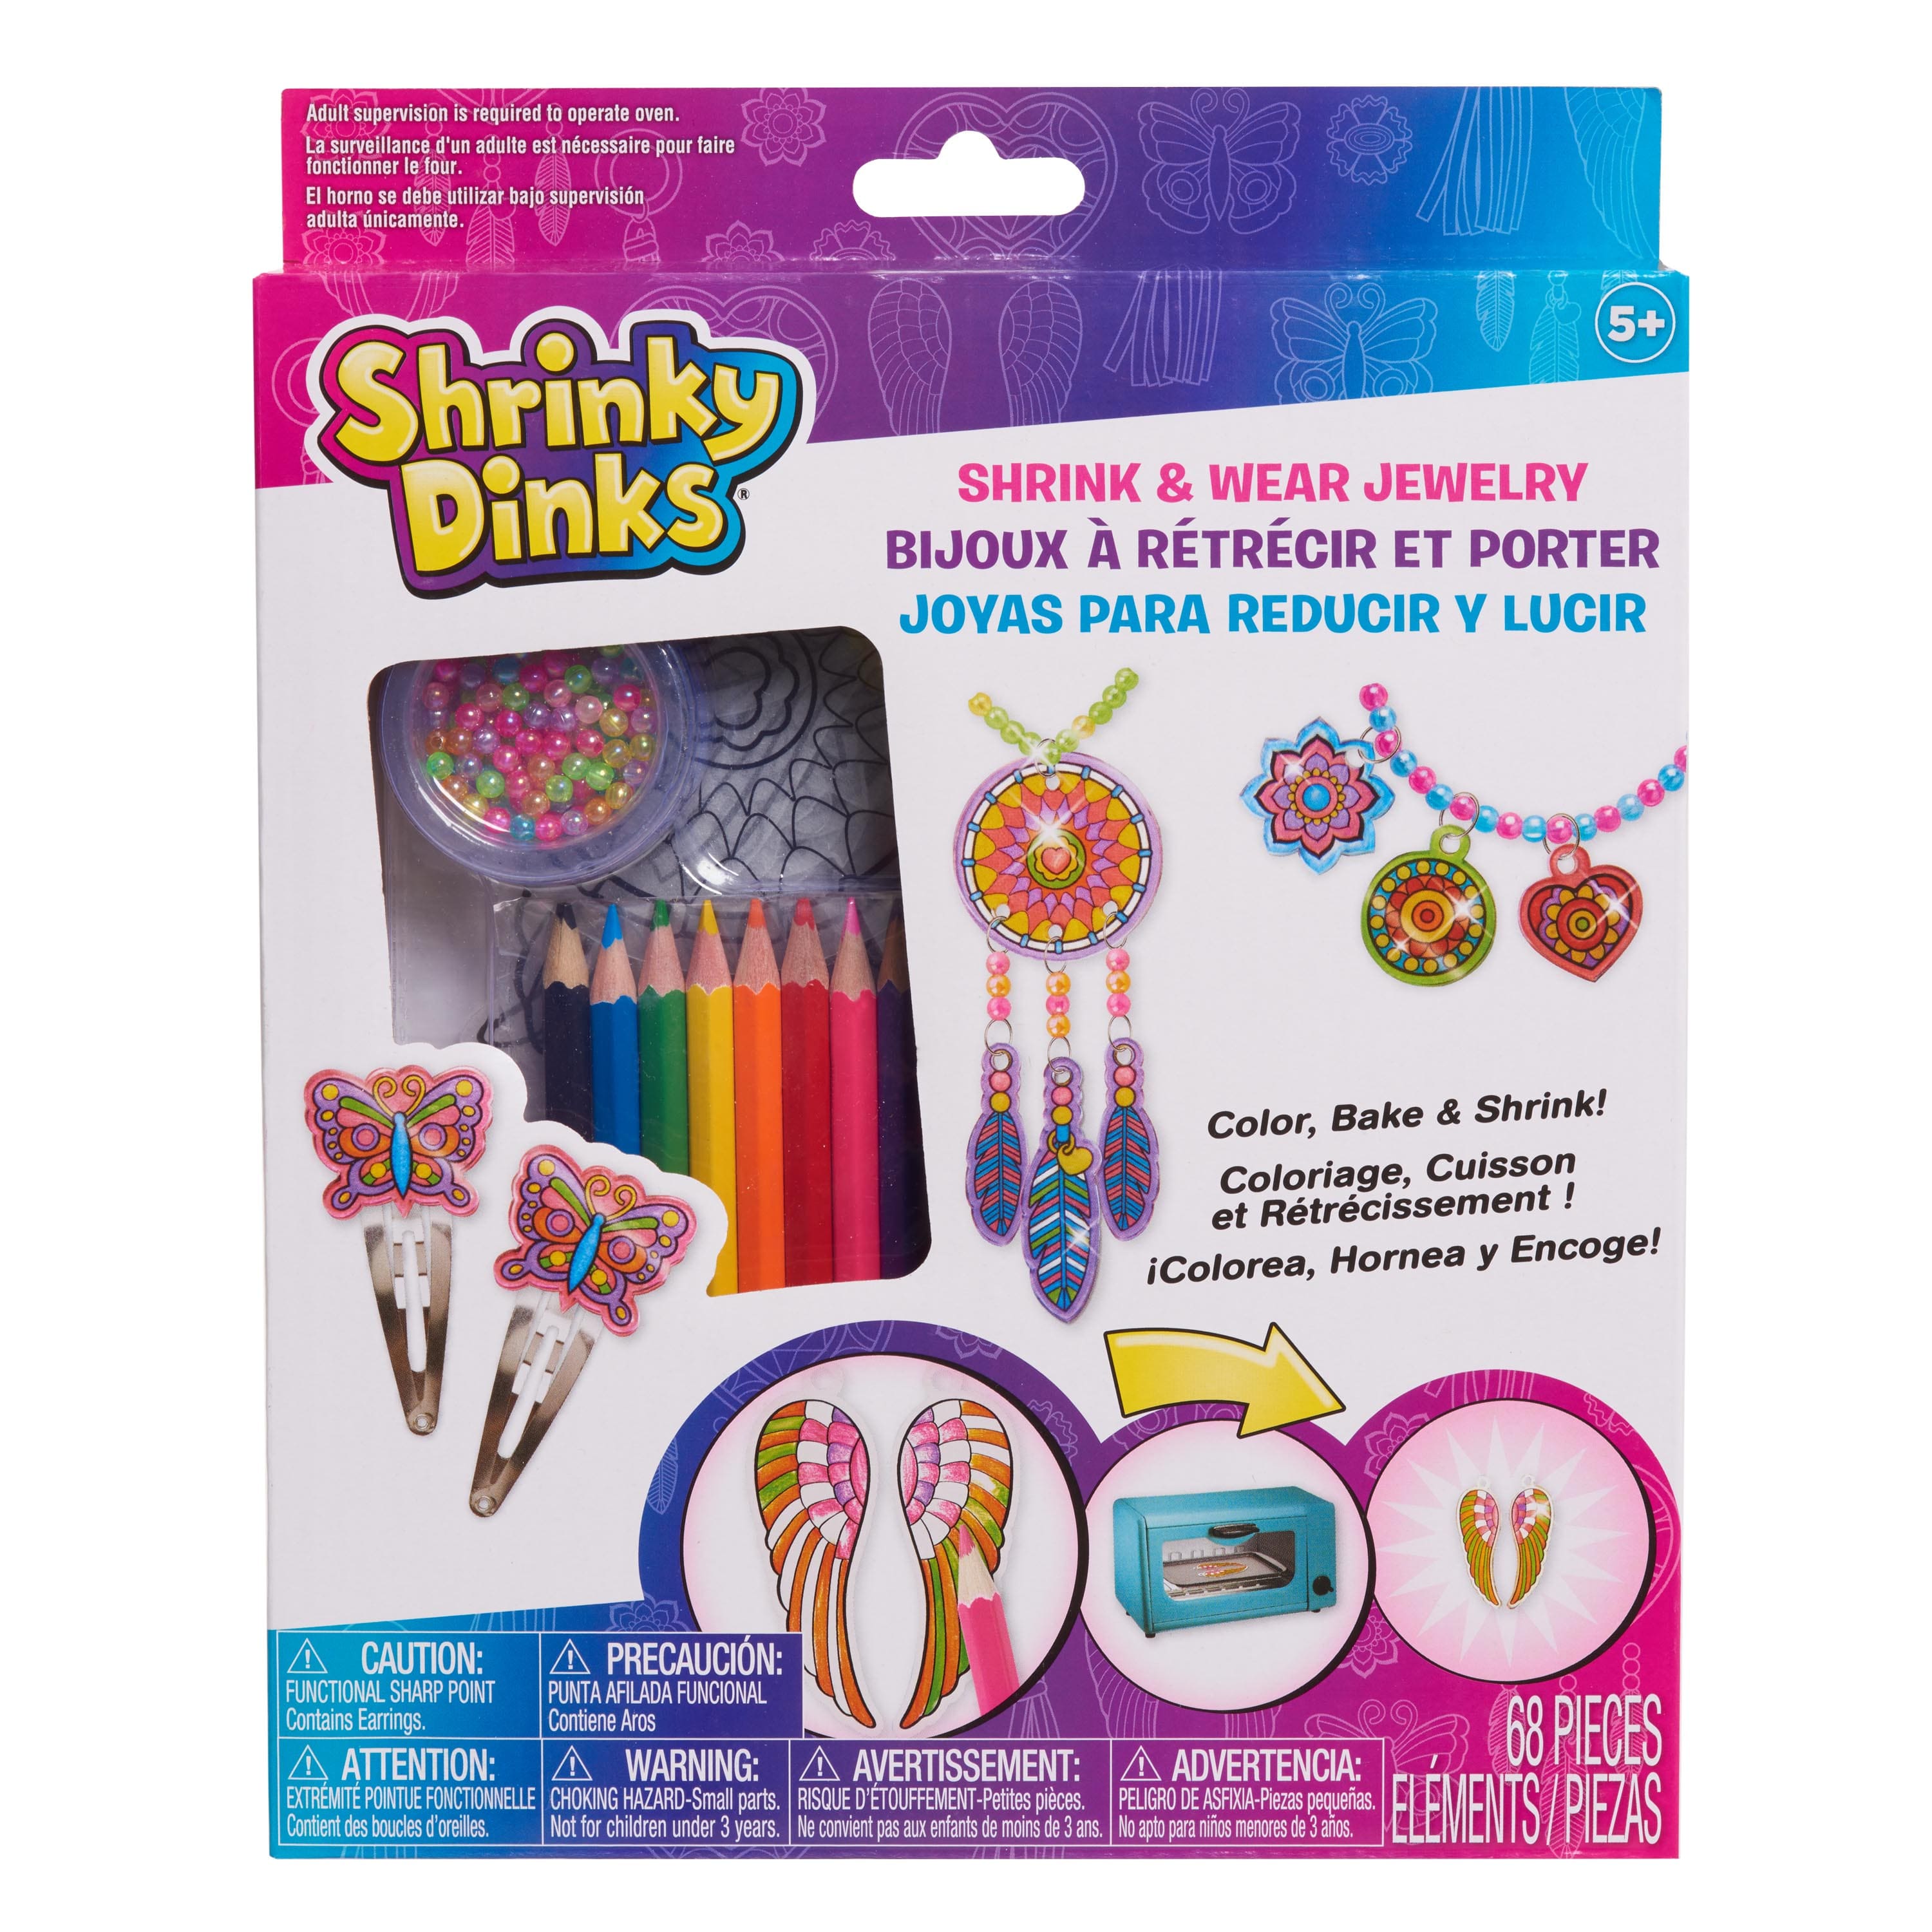 Project ART-A-DAY: Lesson: Shrinky Dink Jewelry